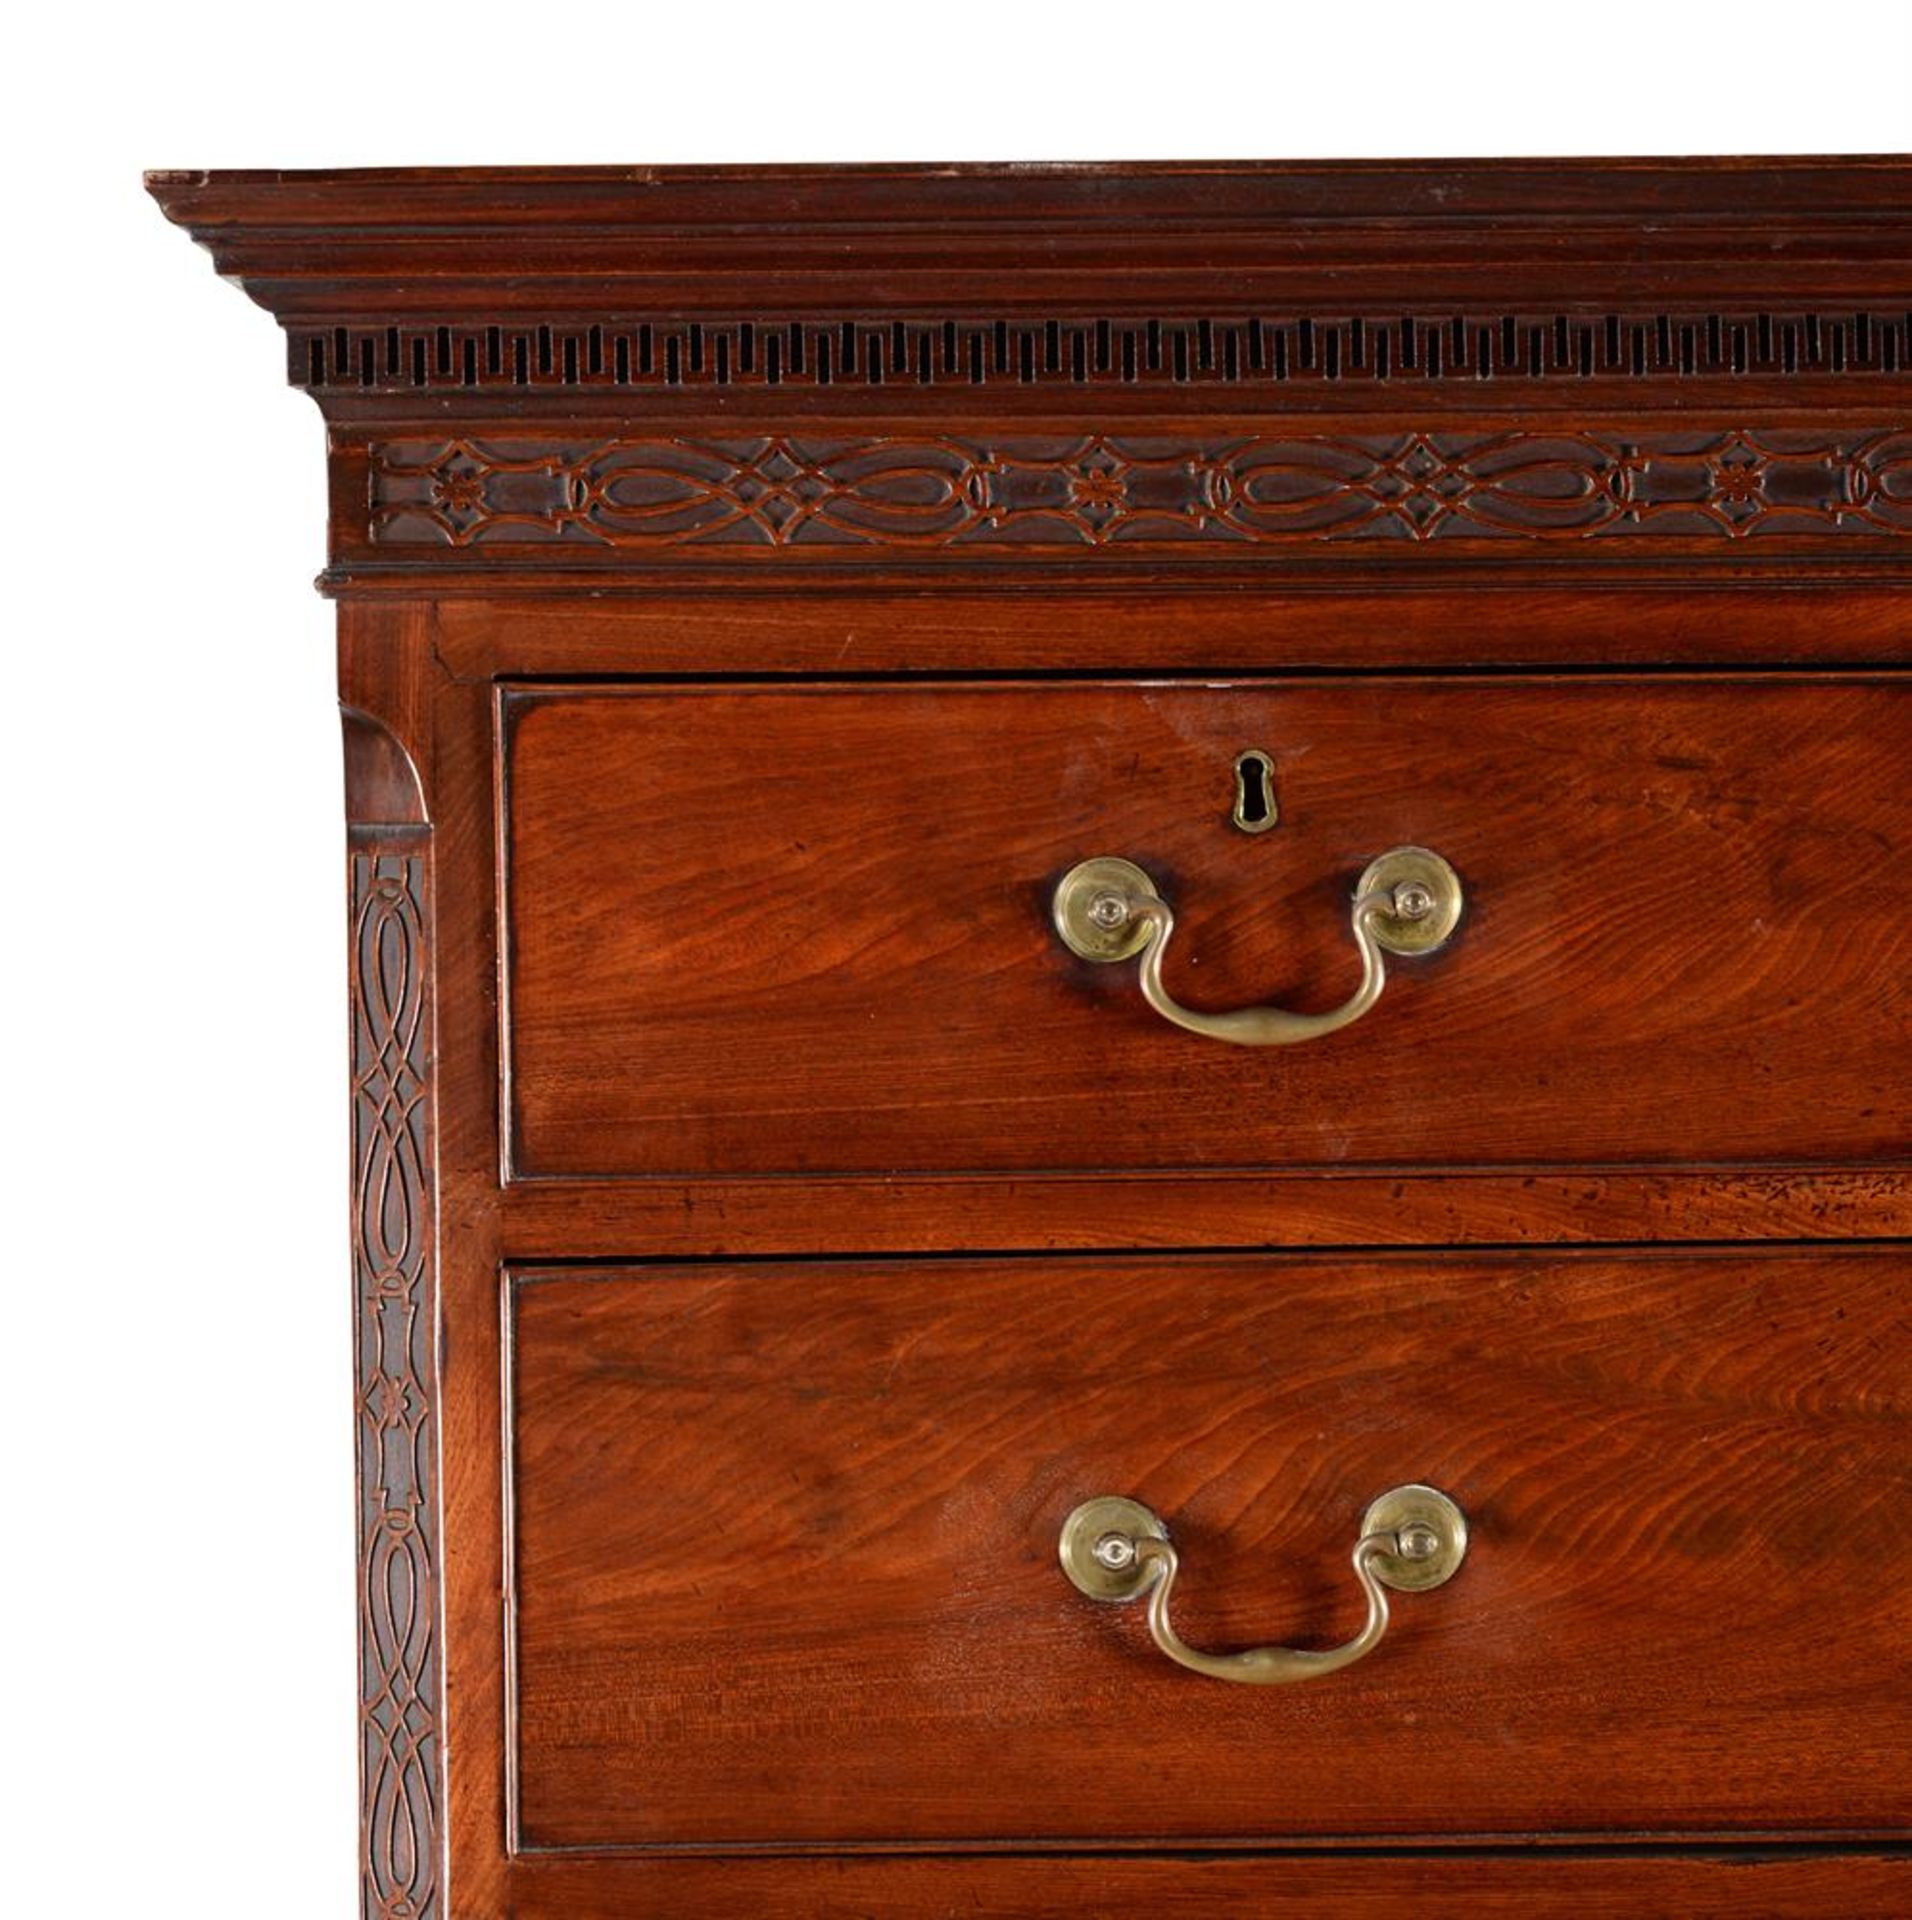 A GEORGE III MAHOGANY CHEST ON CHEST - Image 2 of 3